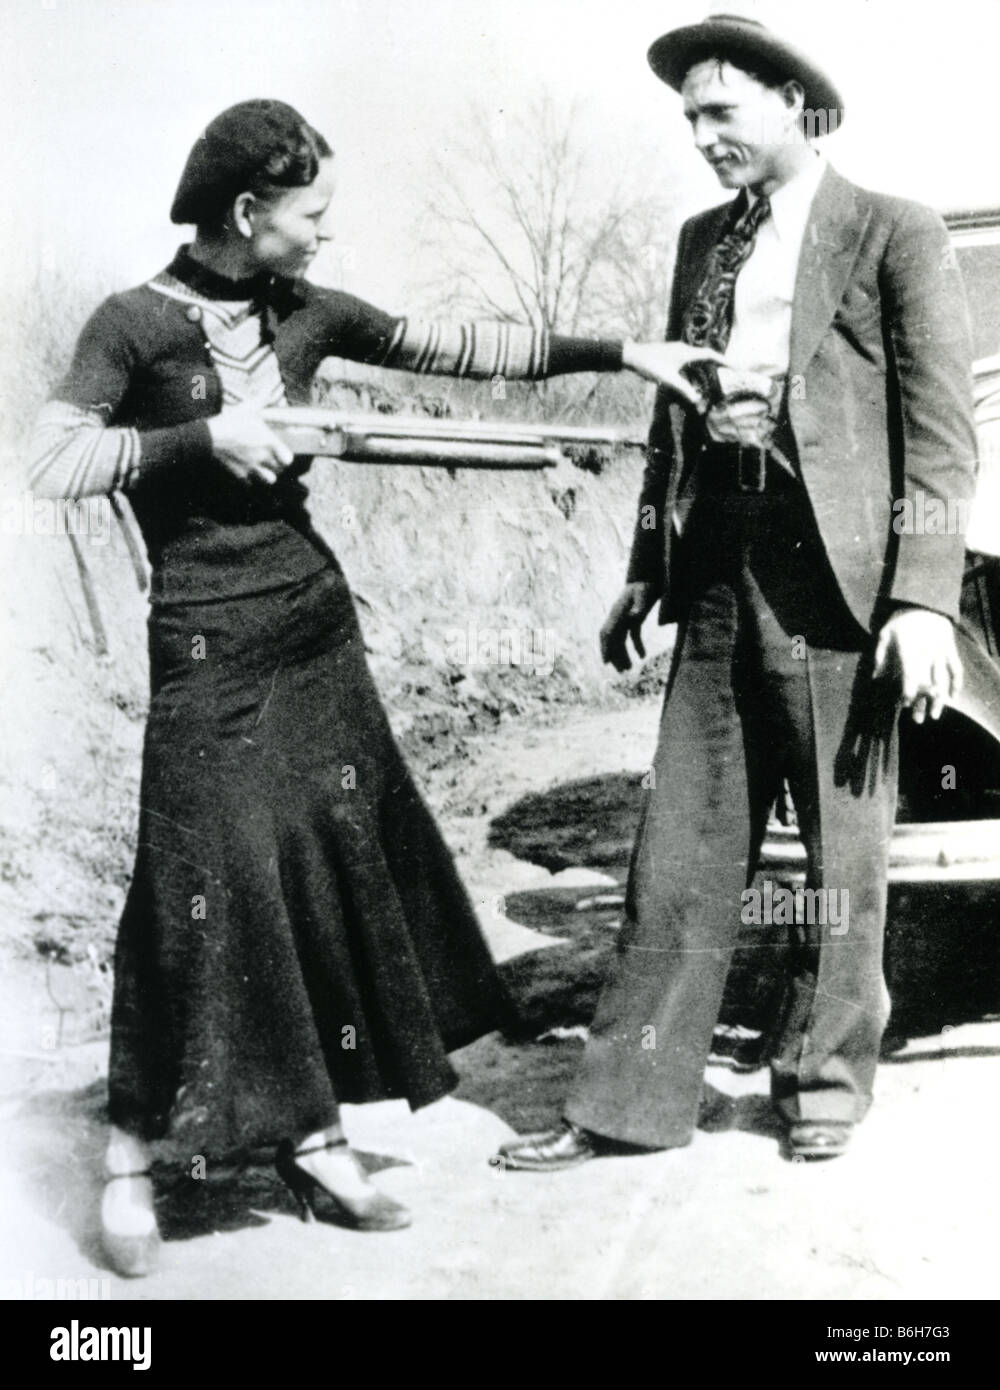 BONNIE AND CLYDE  US robbers and outlaws Bonnie Parker and Clyde Barrow in 1933 with their Ford V8 the year before they died Stock Photo